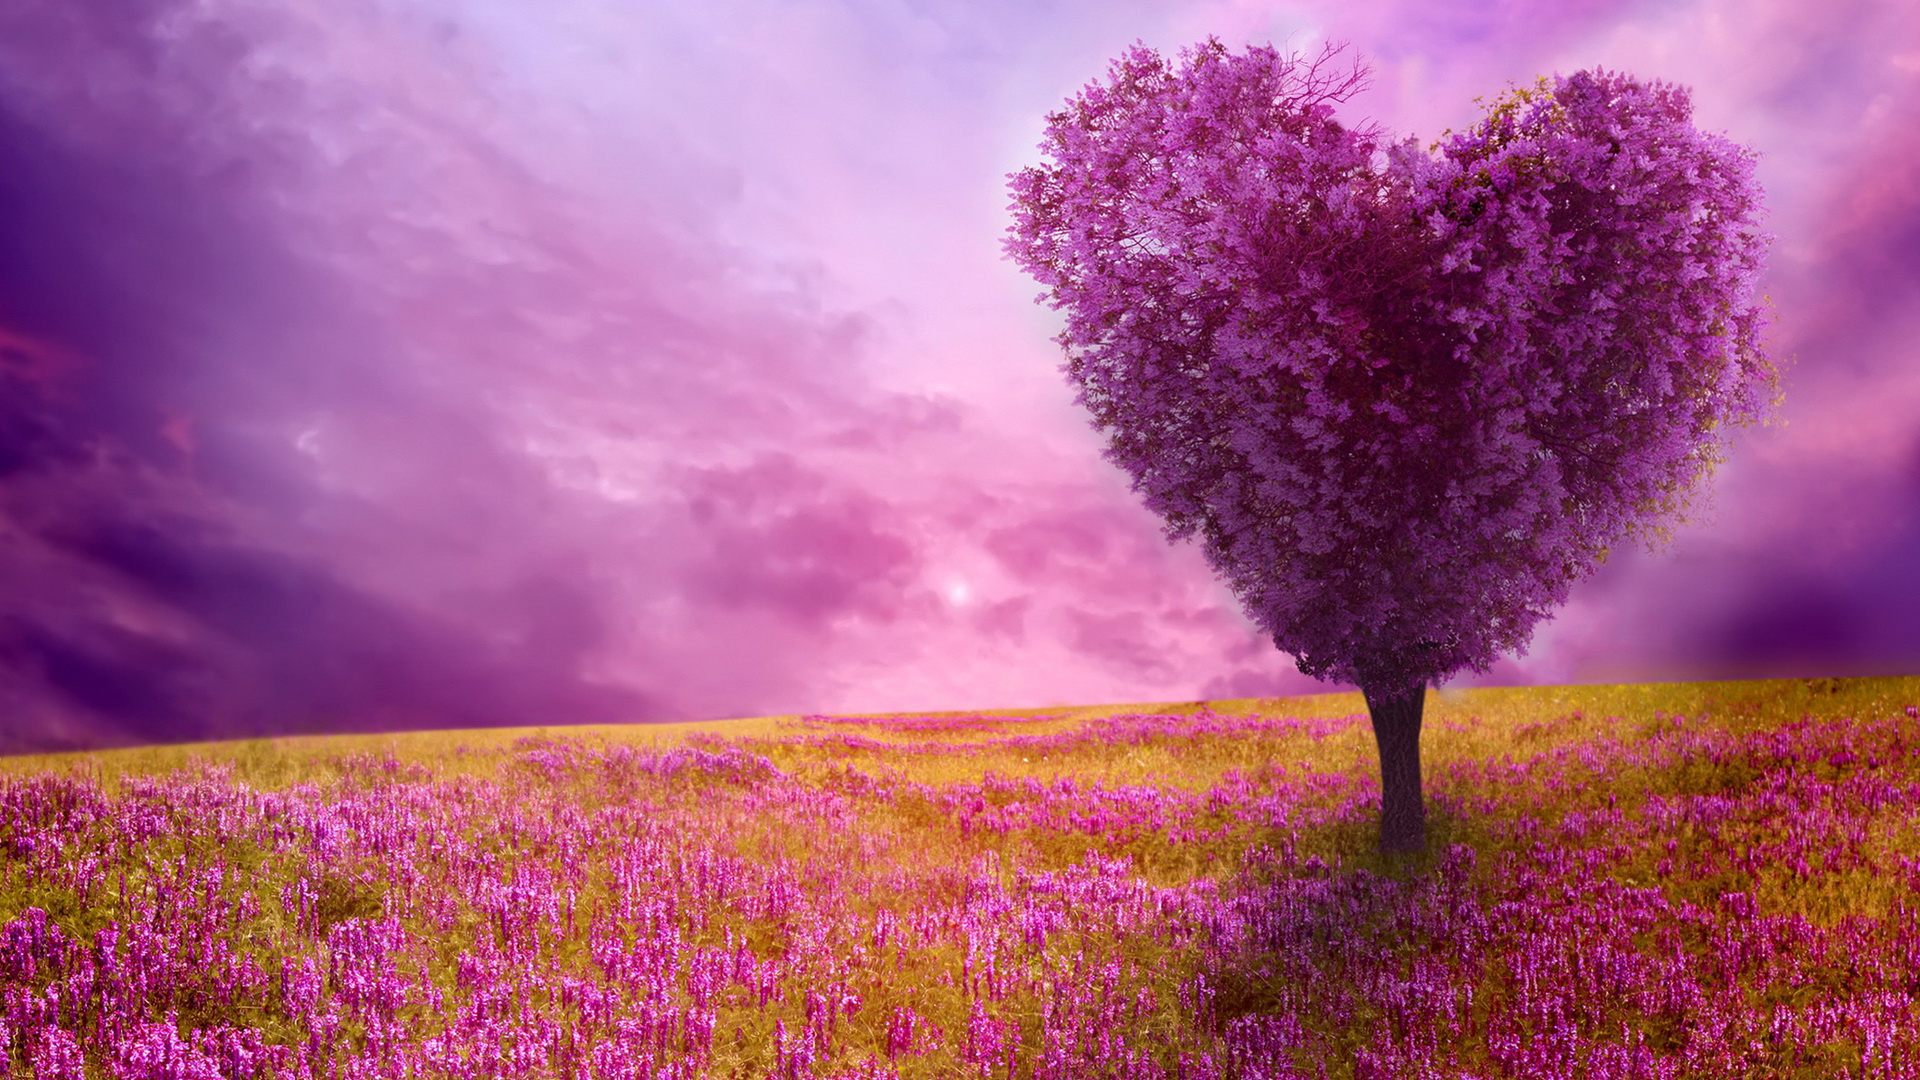 Gallery For Gt HD Spring Nature Background